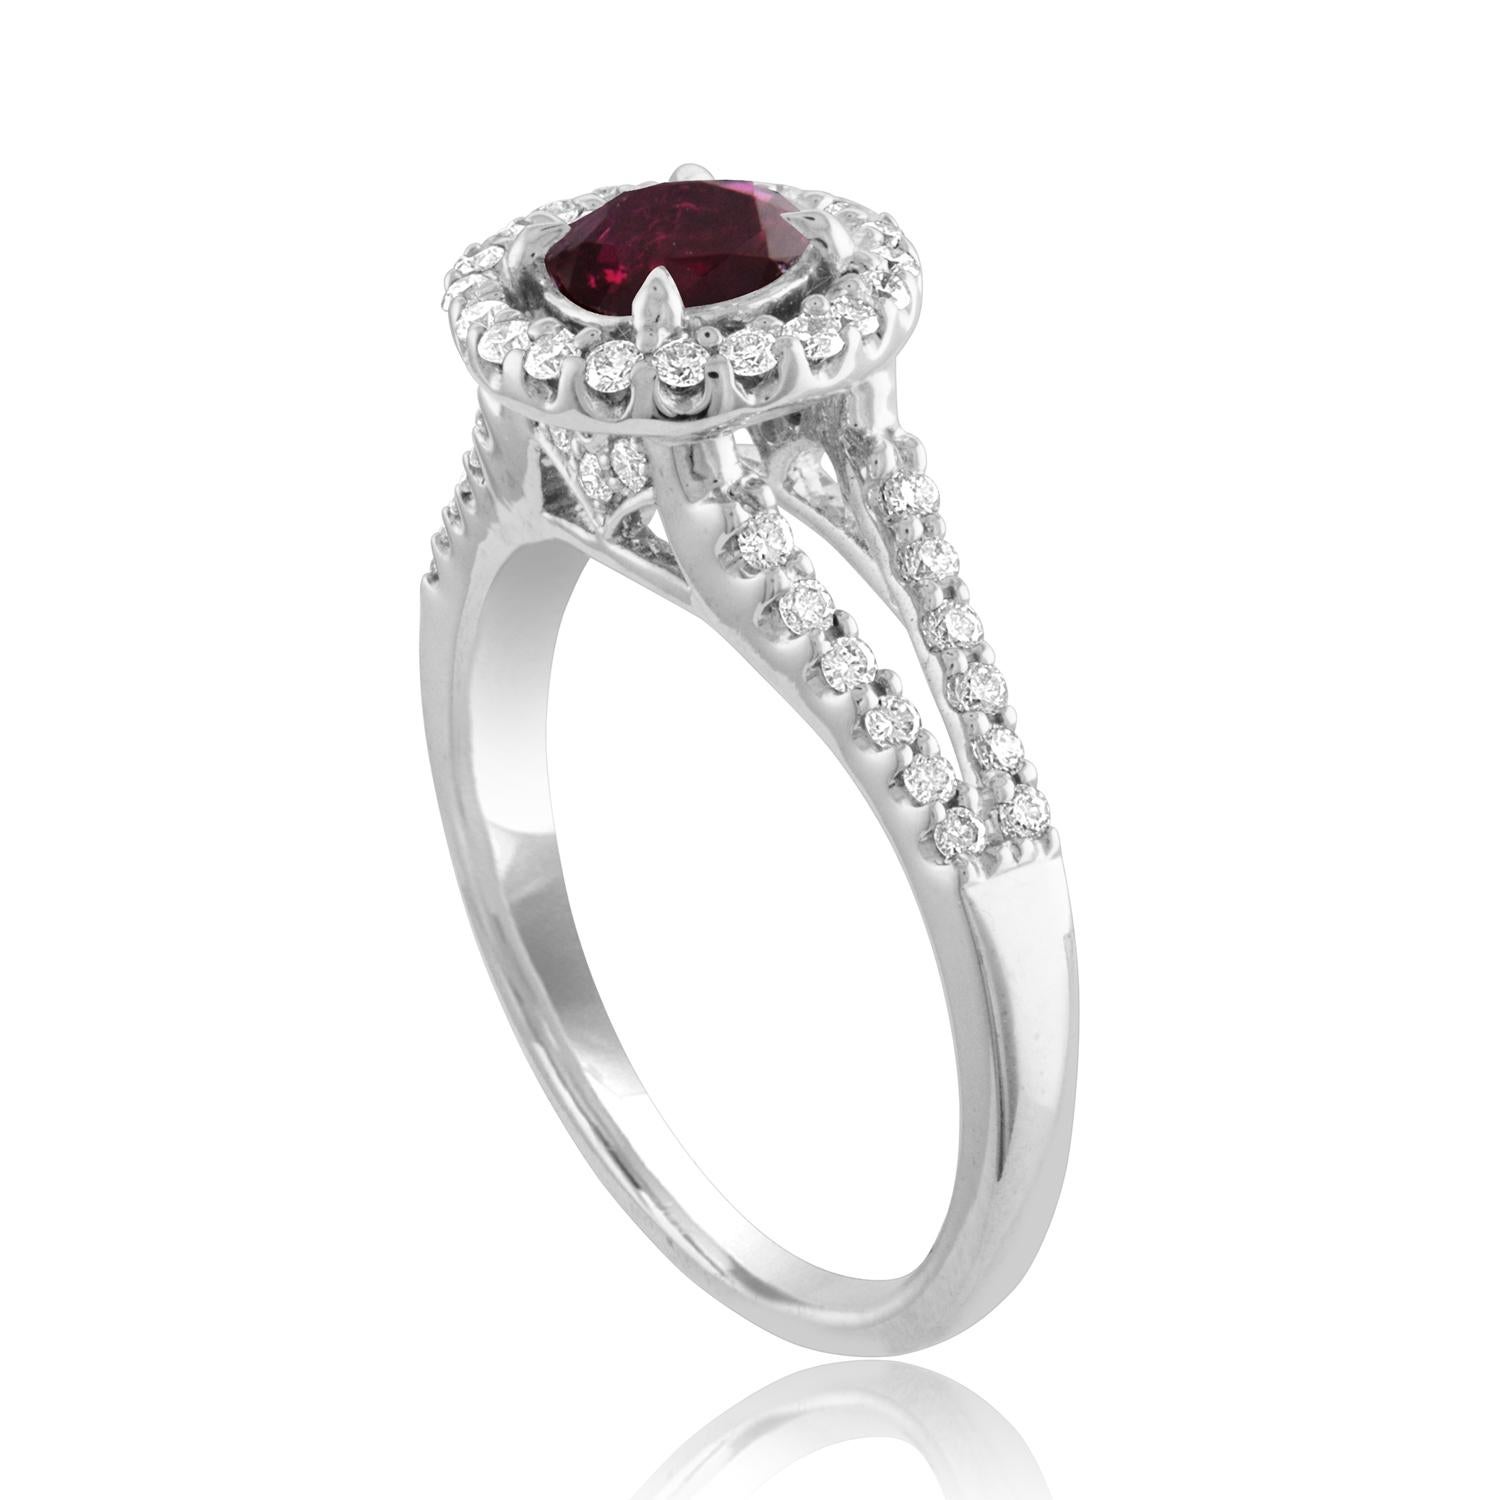 Beautiful Round Halo Split Shank Ring
The ring is 18K White Gold
The Center Stone is a Round Ruby 1.00 Carats
The Ruby is AGL Certified Heated
There are 0.33 Carats in Diamonds F/G VS/SI
The ring is a size 6.5, sizable.
The ring weighs 4.4 grams